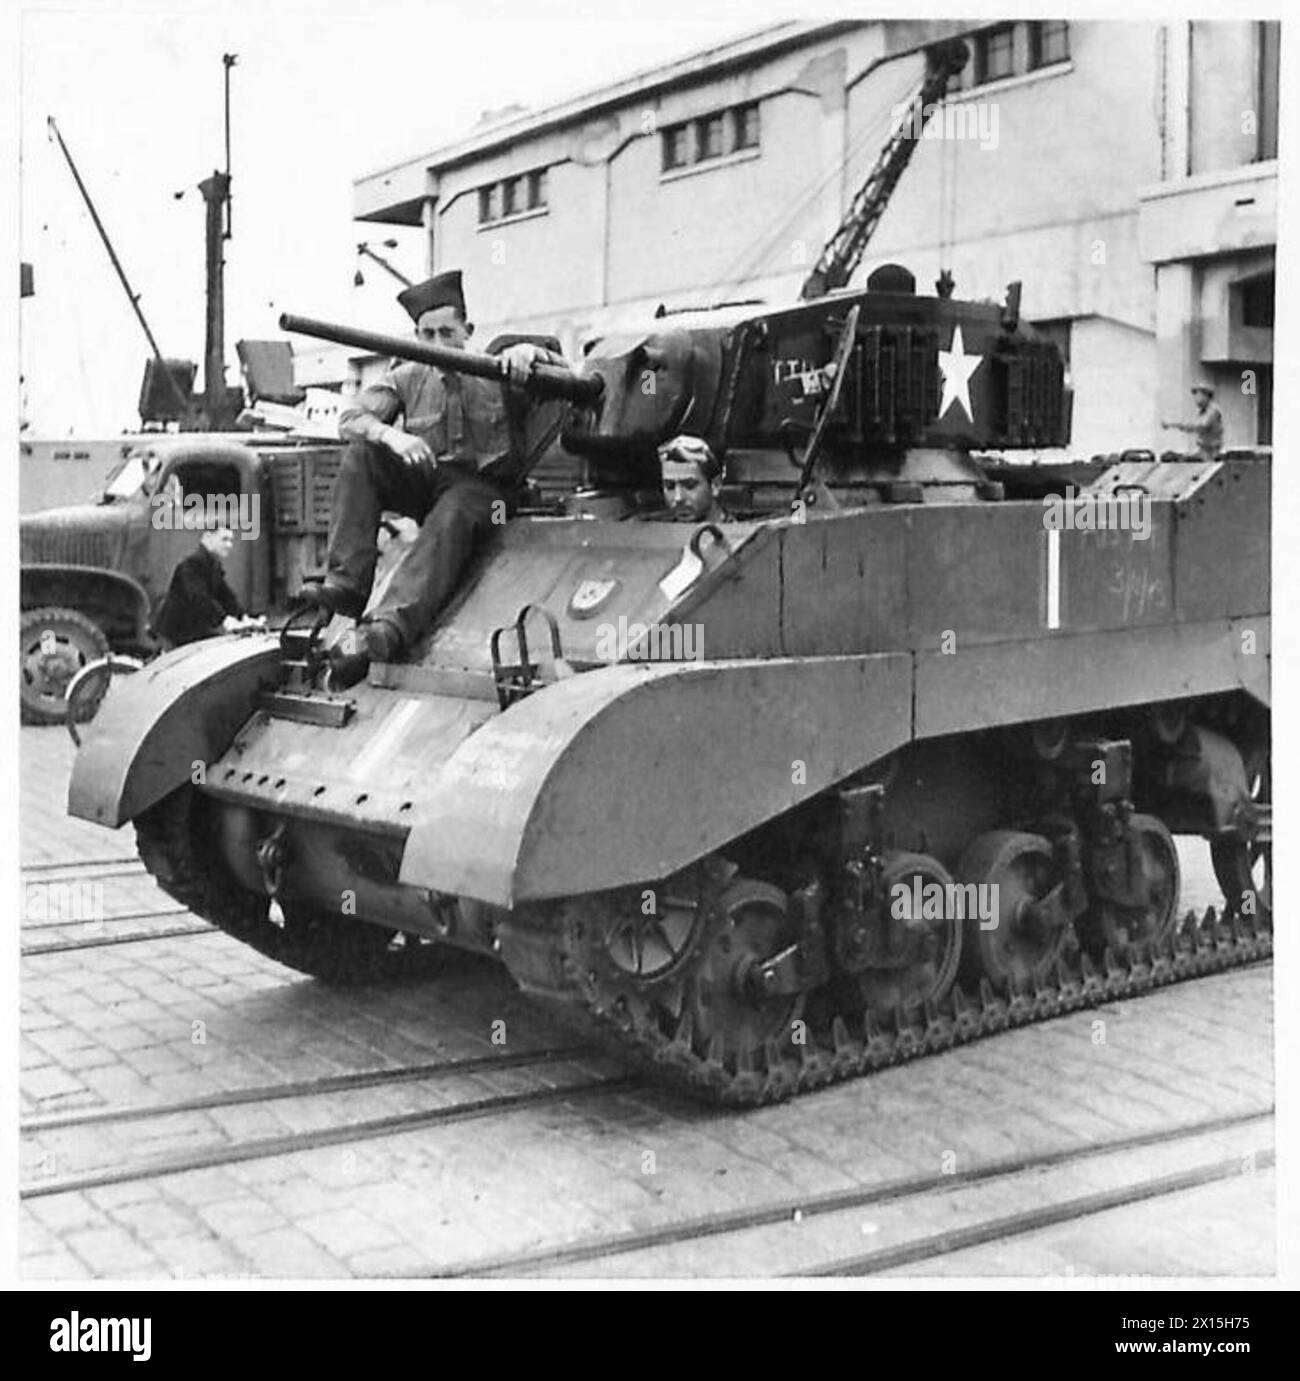 LEASE-LEND SUPPLIES FOR THE FRENCH ARMY IN NORTH AFRICA - One of the many light tanks which were handed over to the French British Army Stock Photo